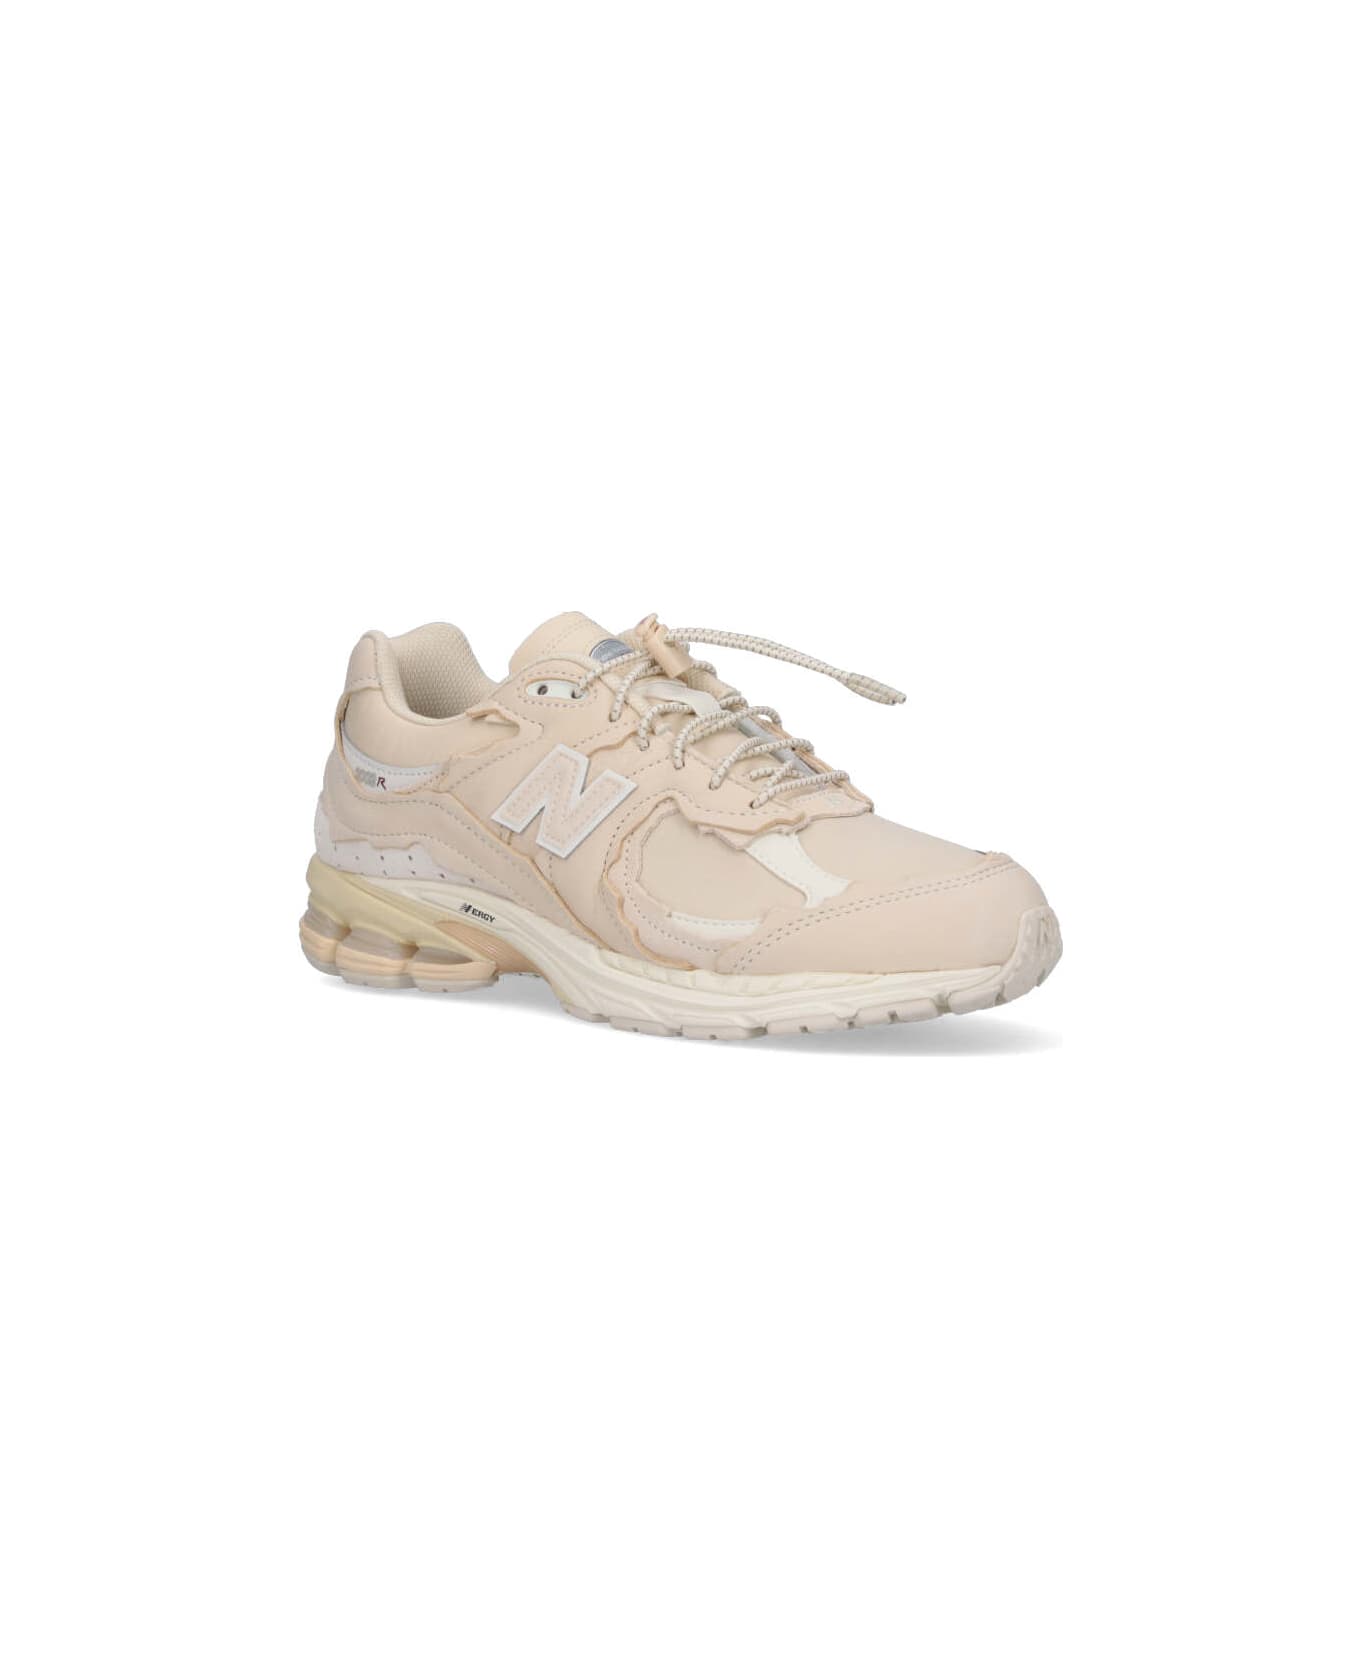 New Balance "2002r Protection Pack" Sneakers - Beige